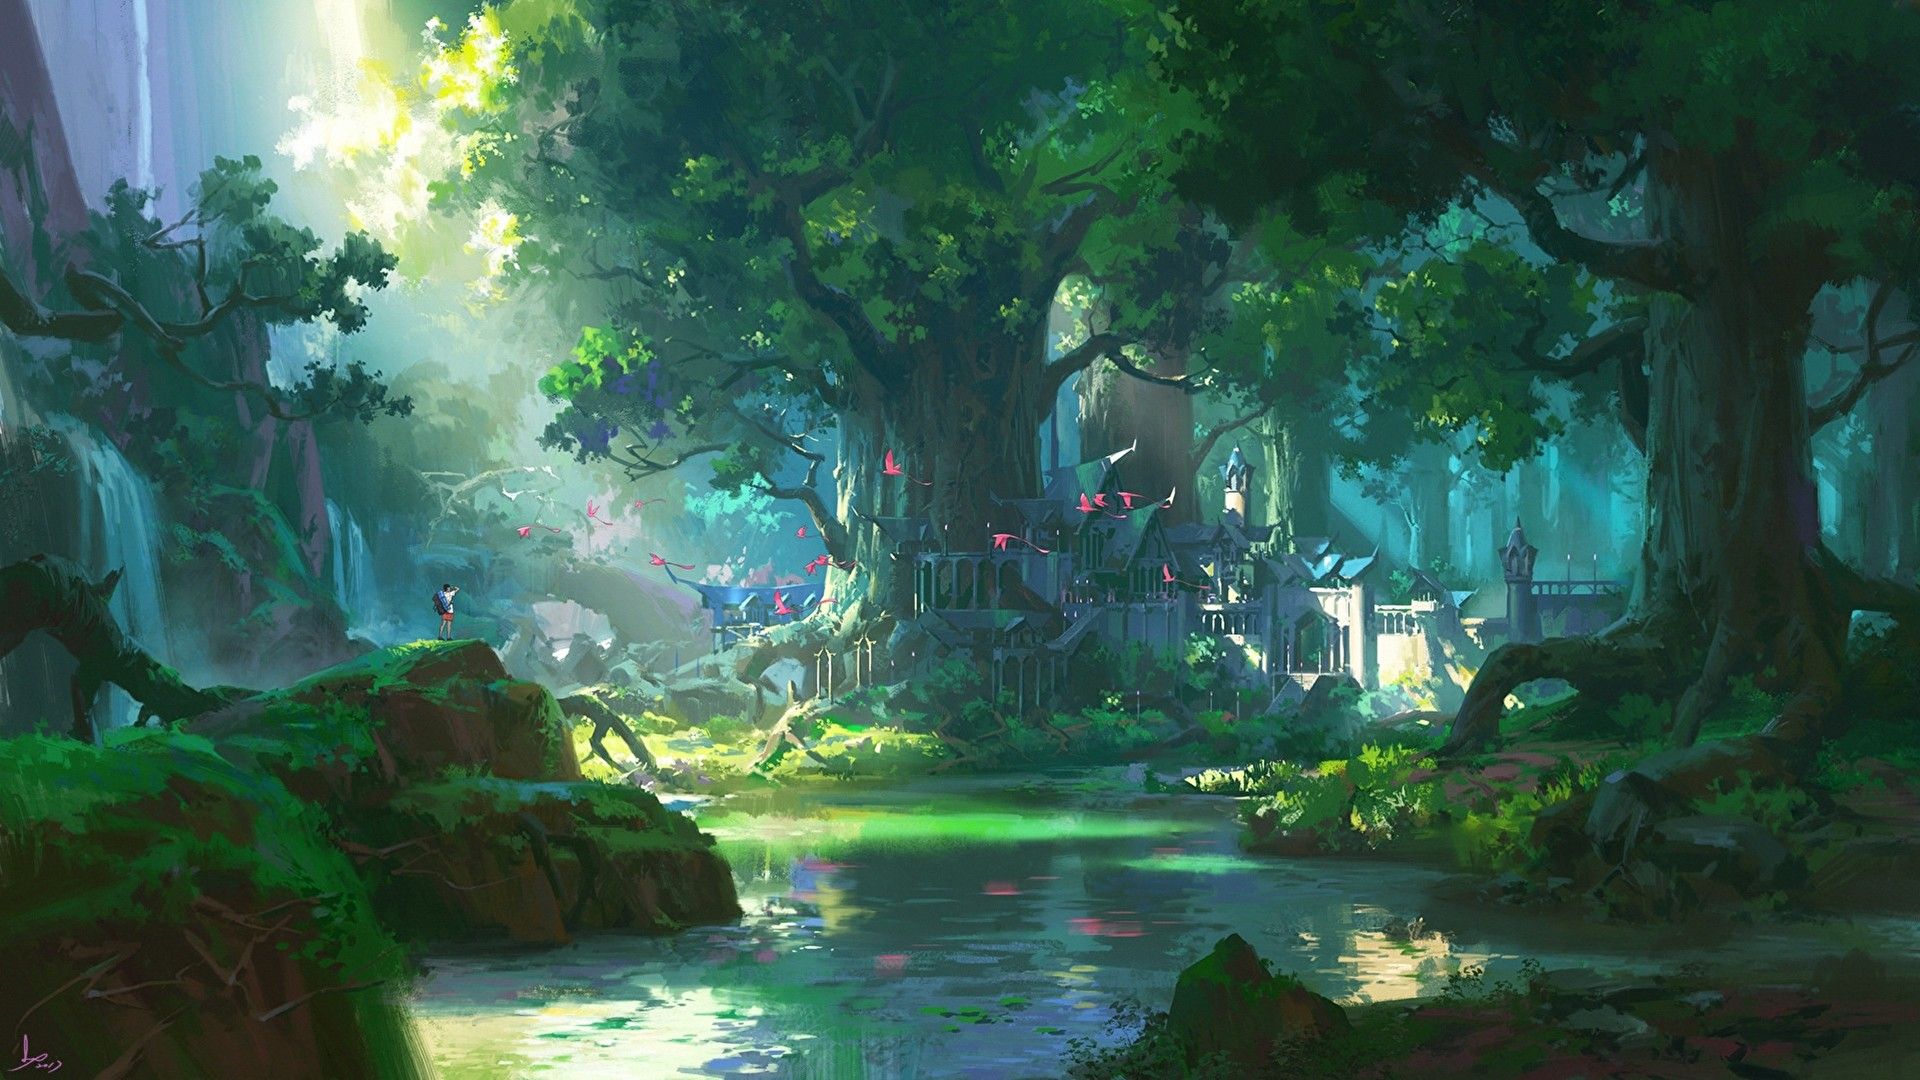 Free download Anime Forest Scenery 1920x1080 If you like ...